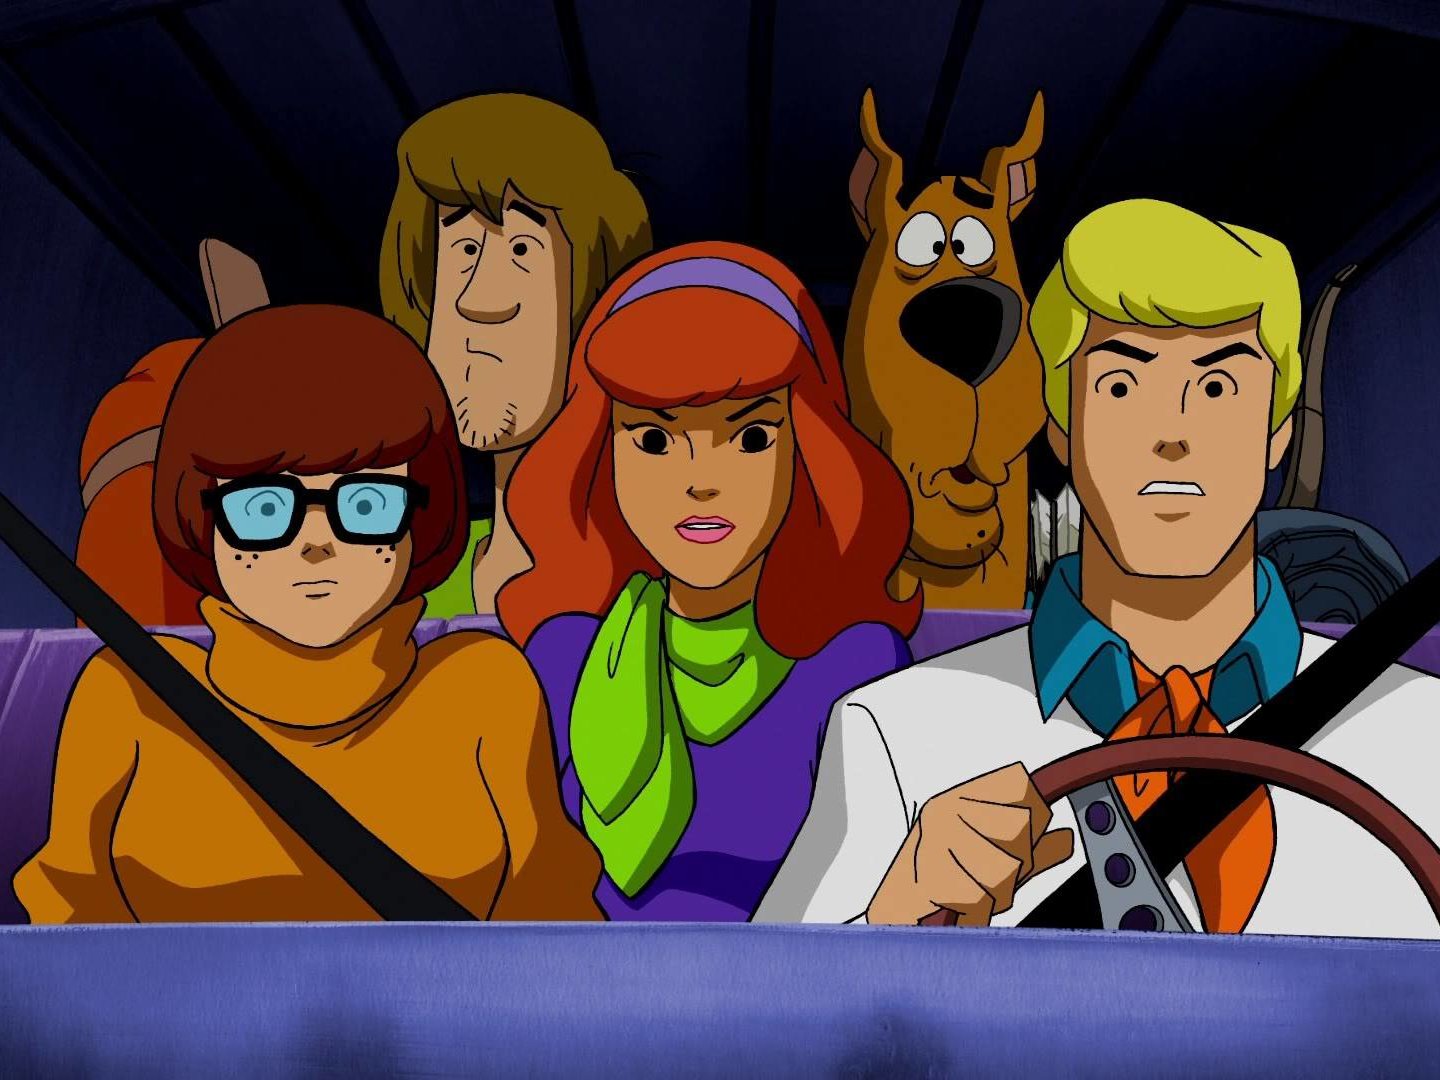 The latest “Scooby-Doo” film has Velma as a member of the LGBTQ+ community